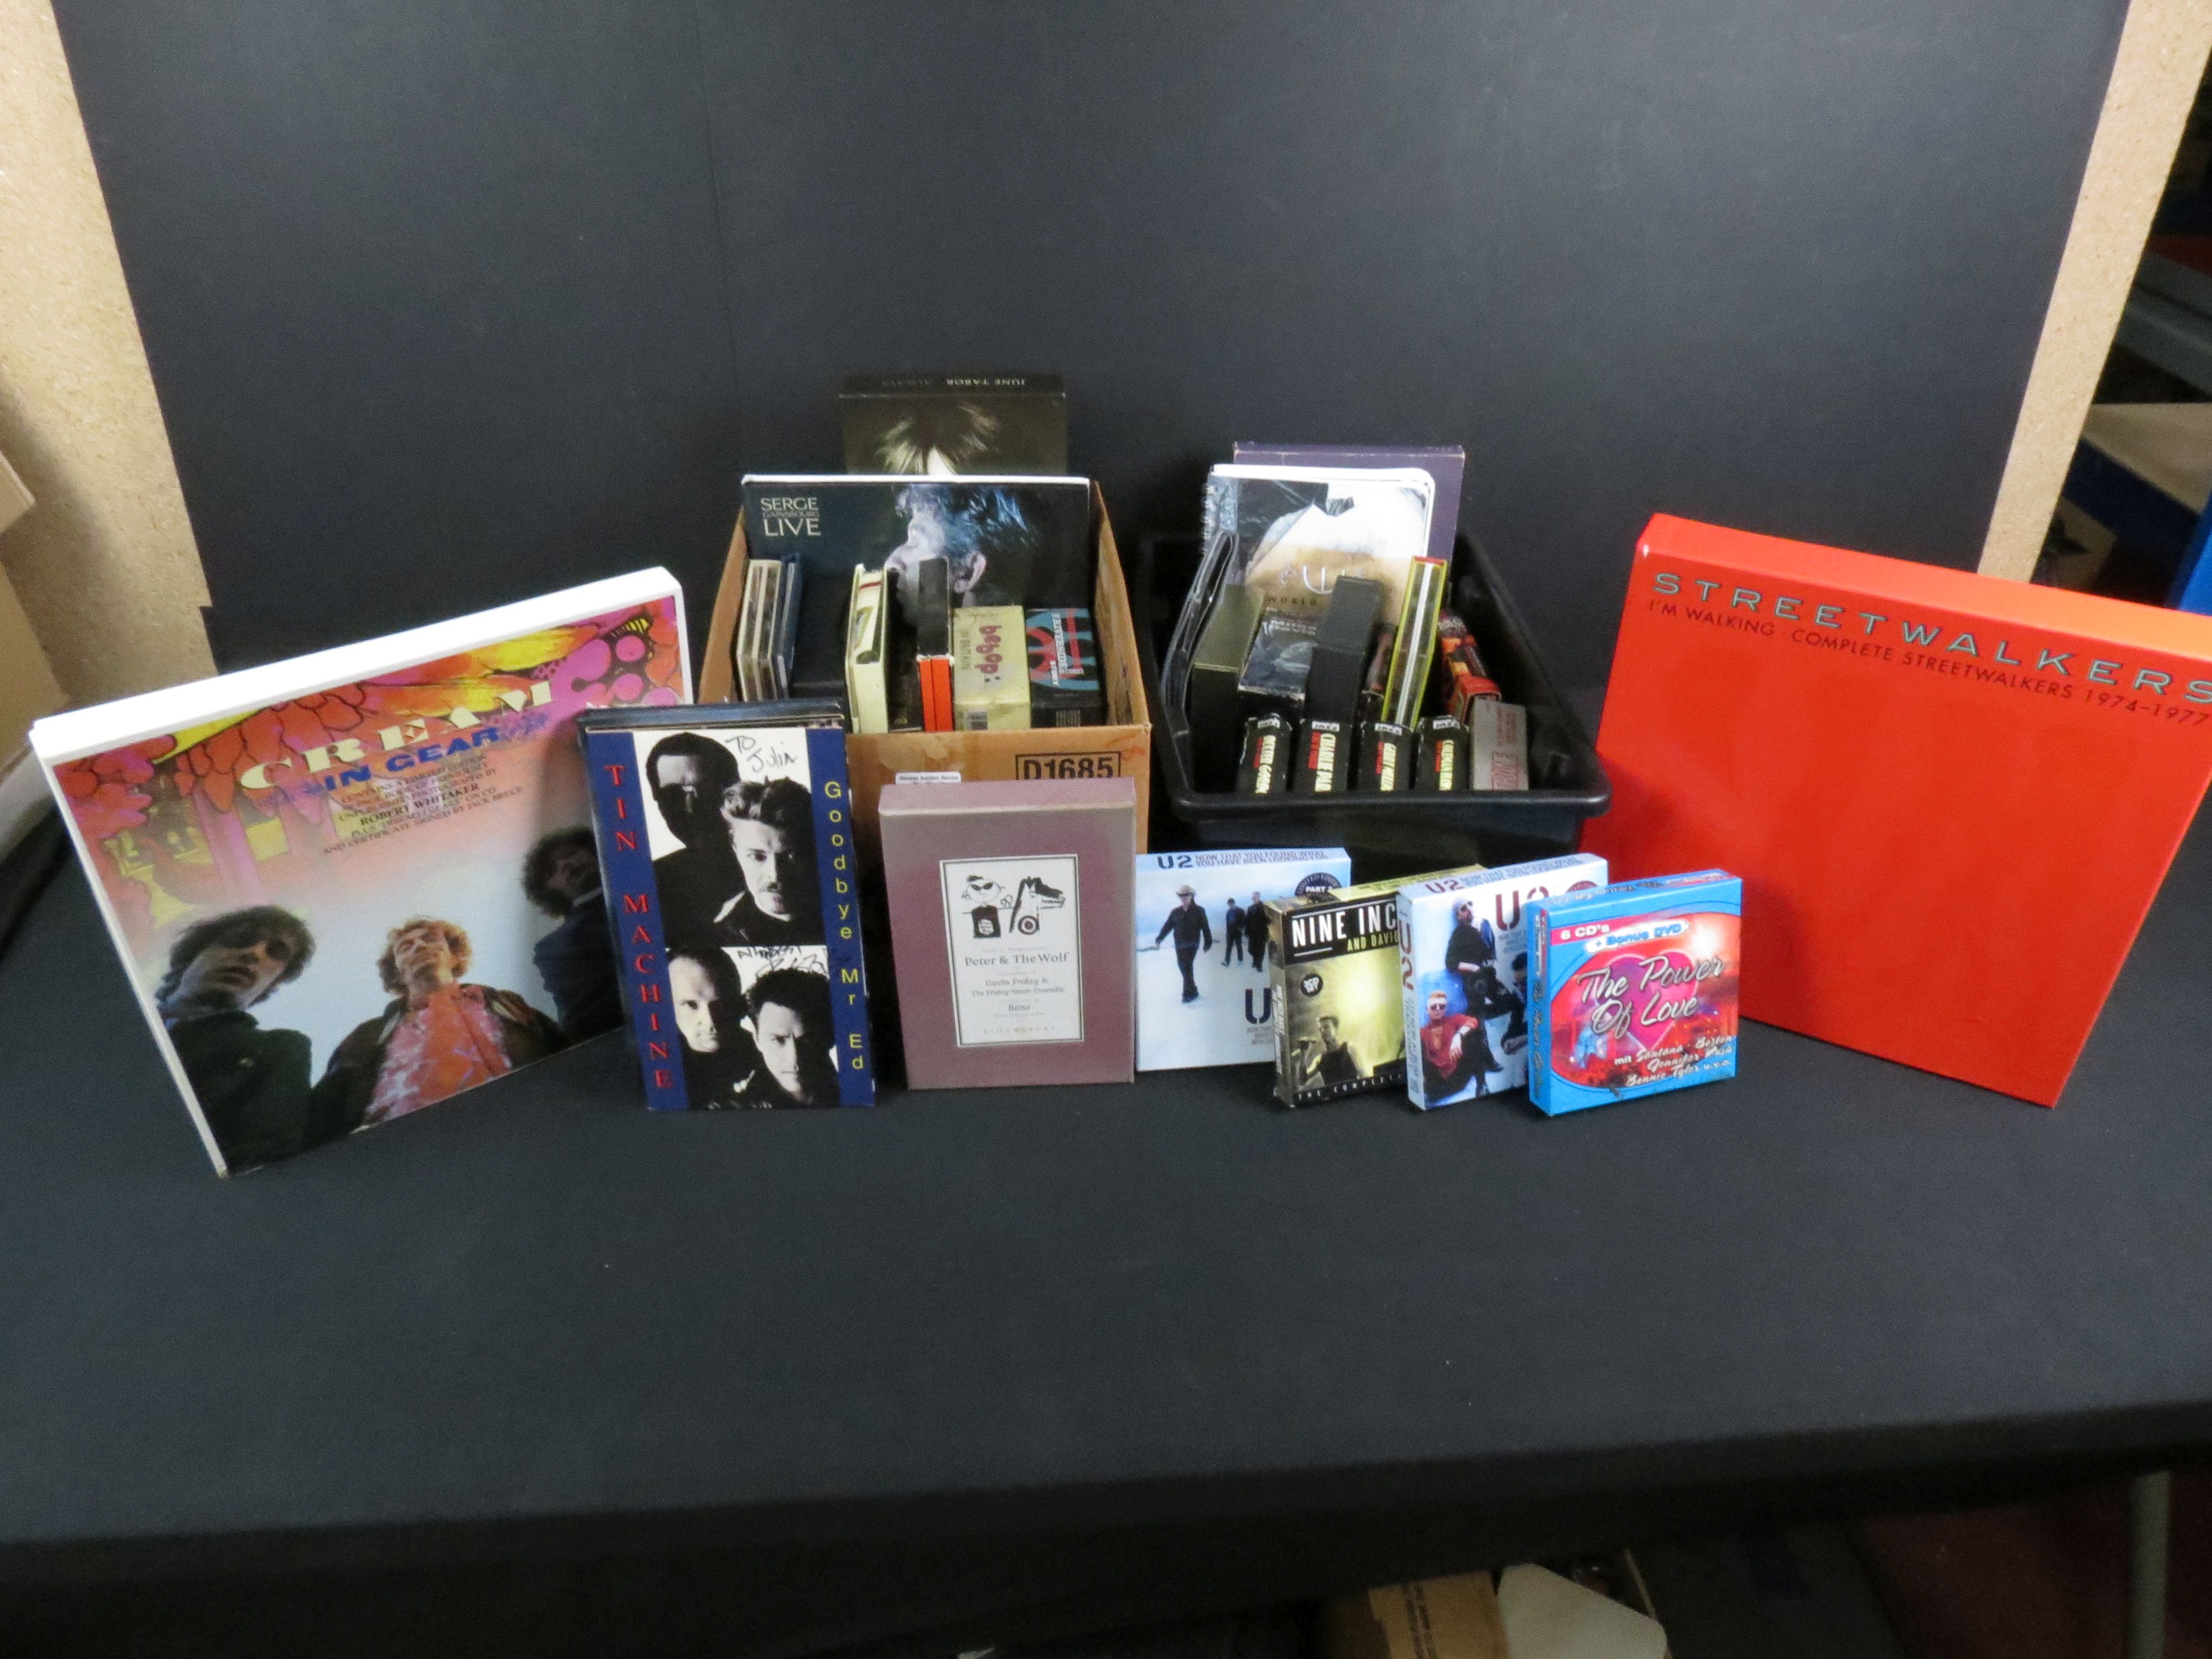 CDs - Around 33 Box Sets spanning the genres with good Jazz interest, include REM, U2, Miles